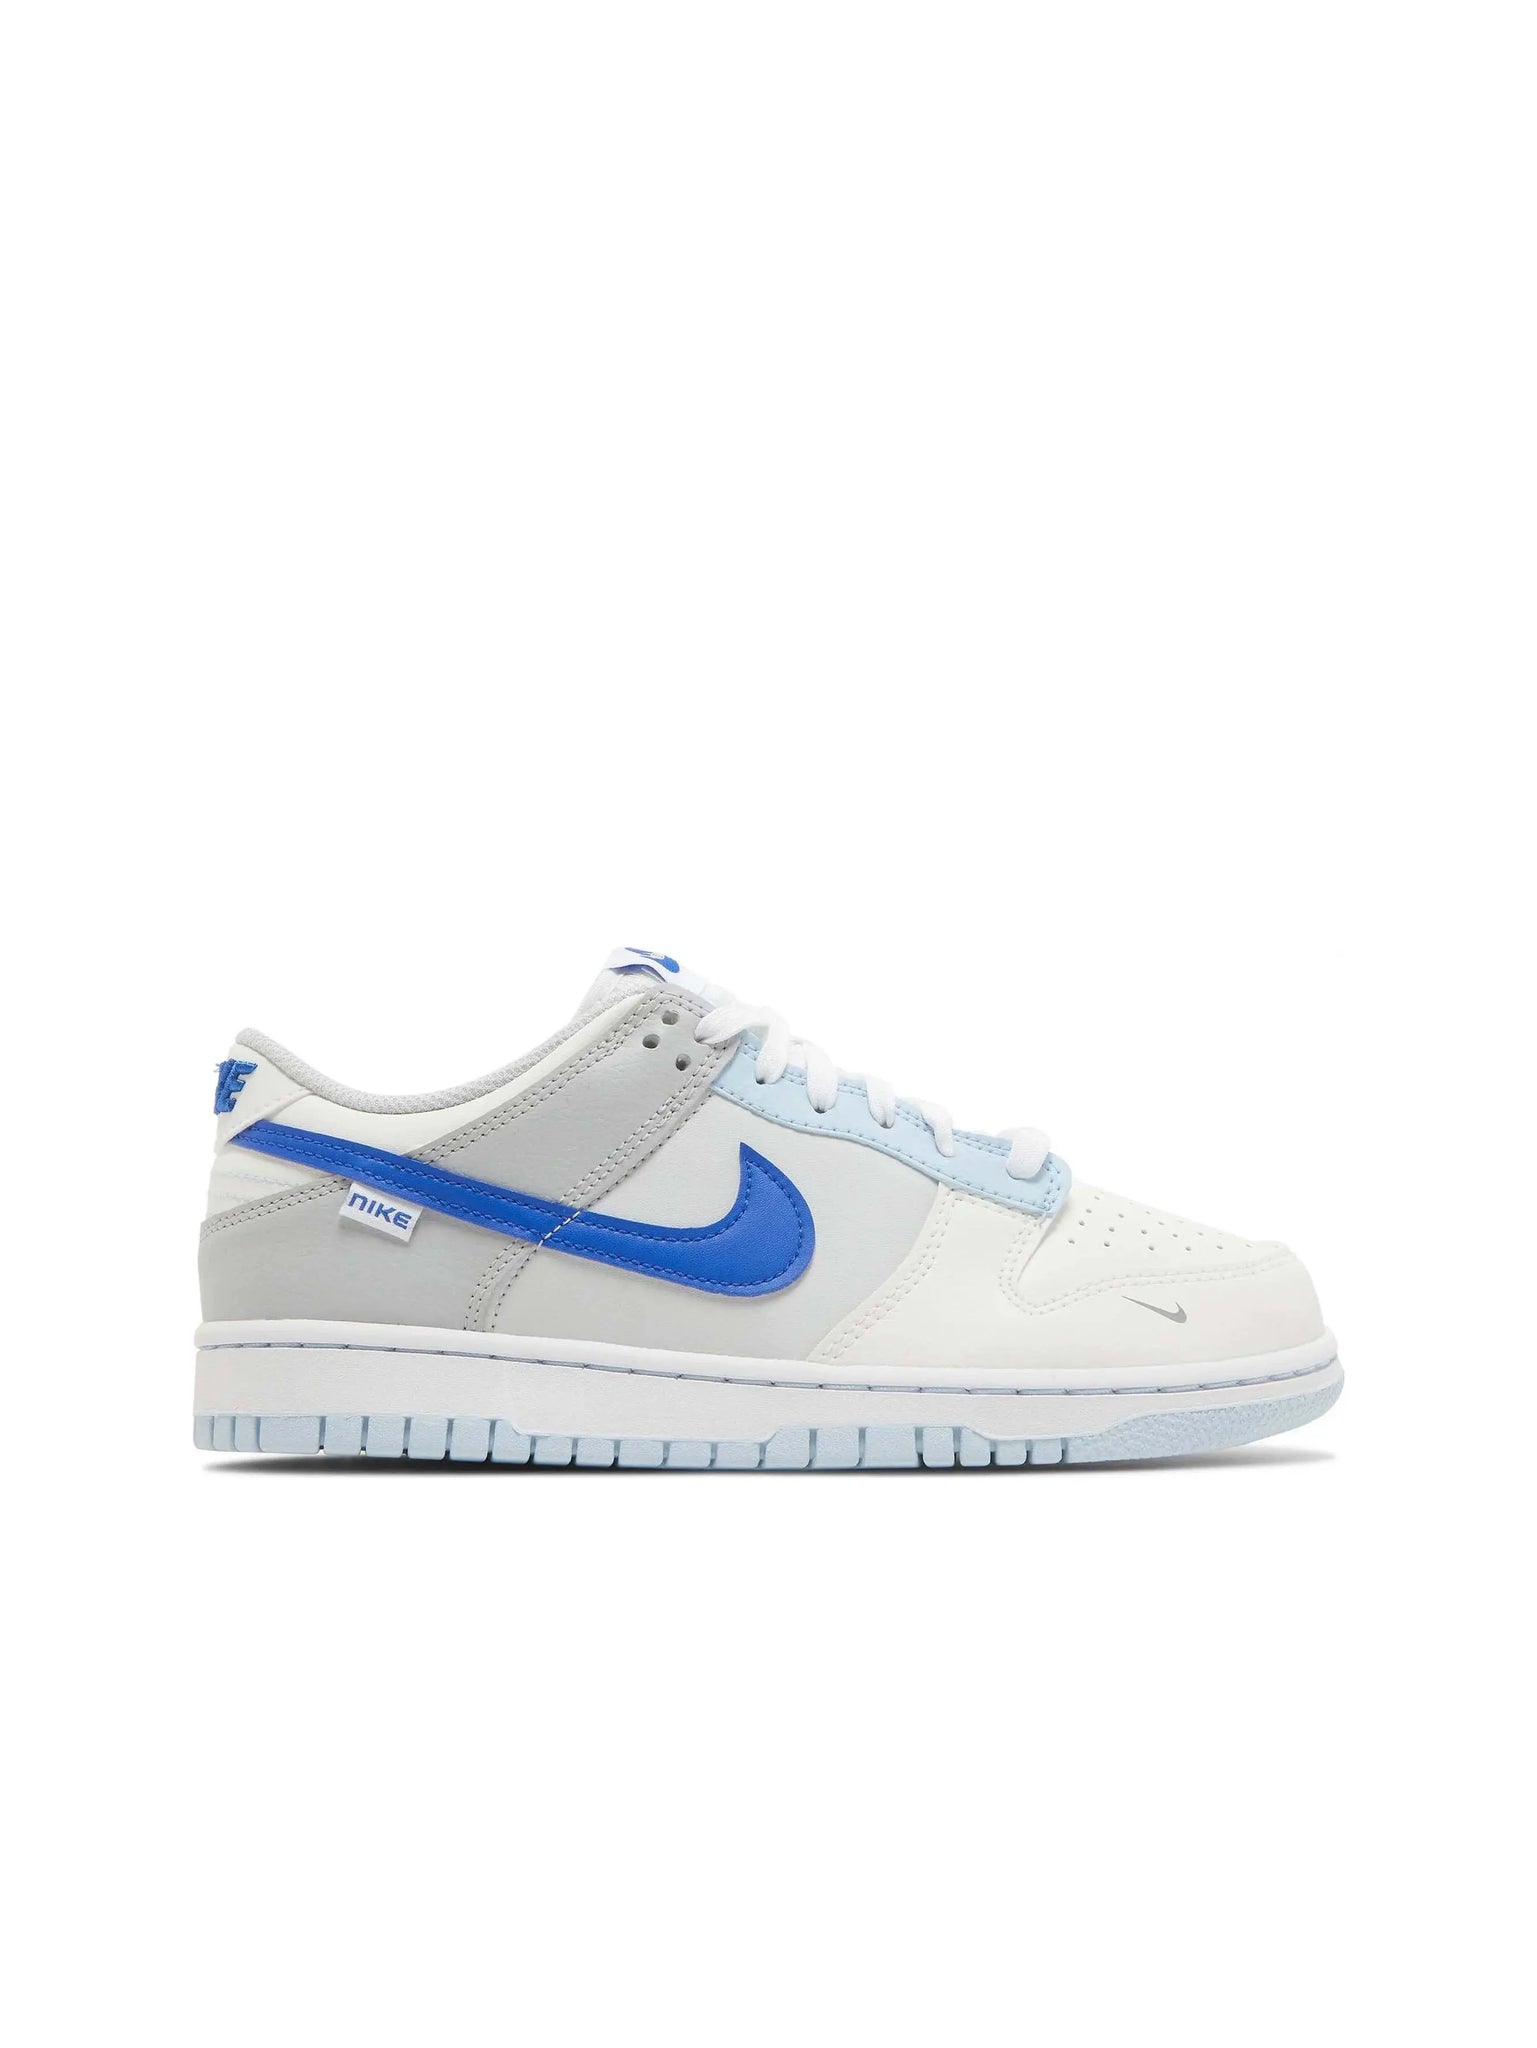 Nike Dunk Low Ivory Hyper Royal (GS) in Melbourne, Australia - Prior